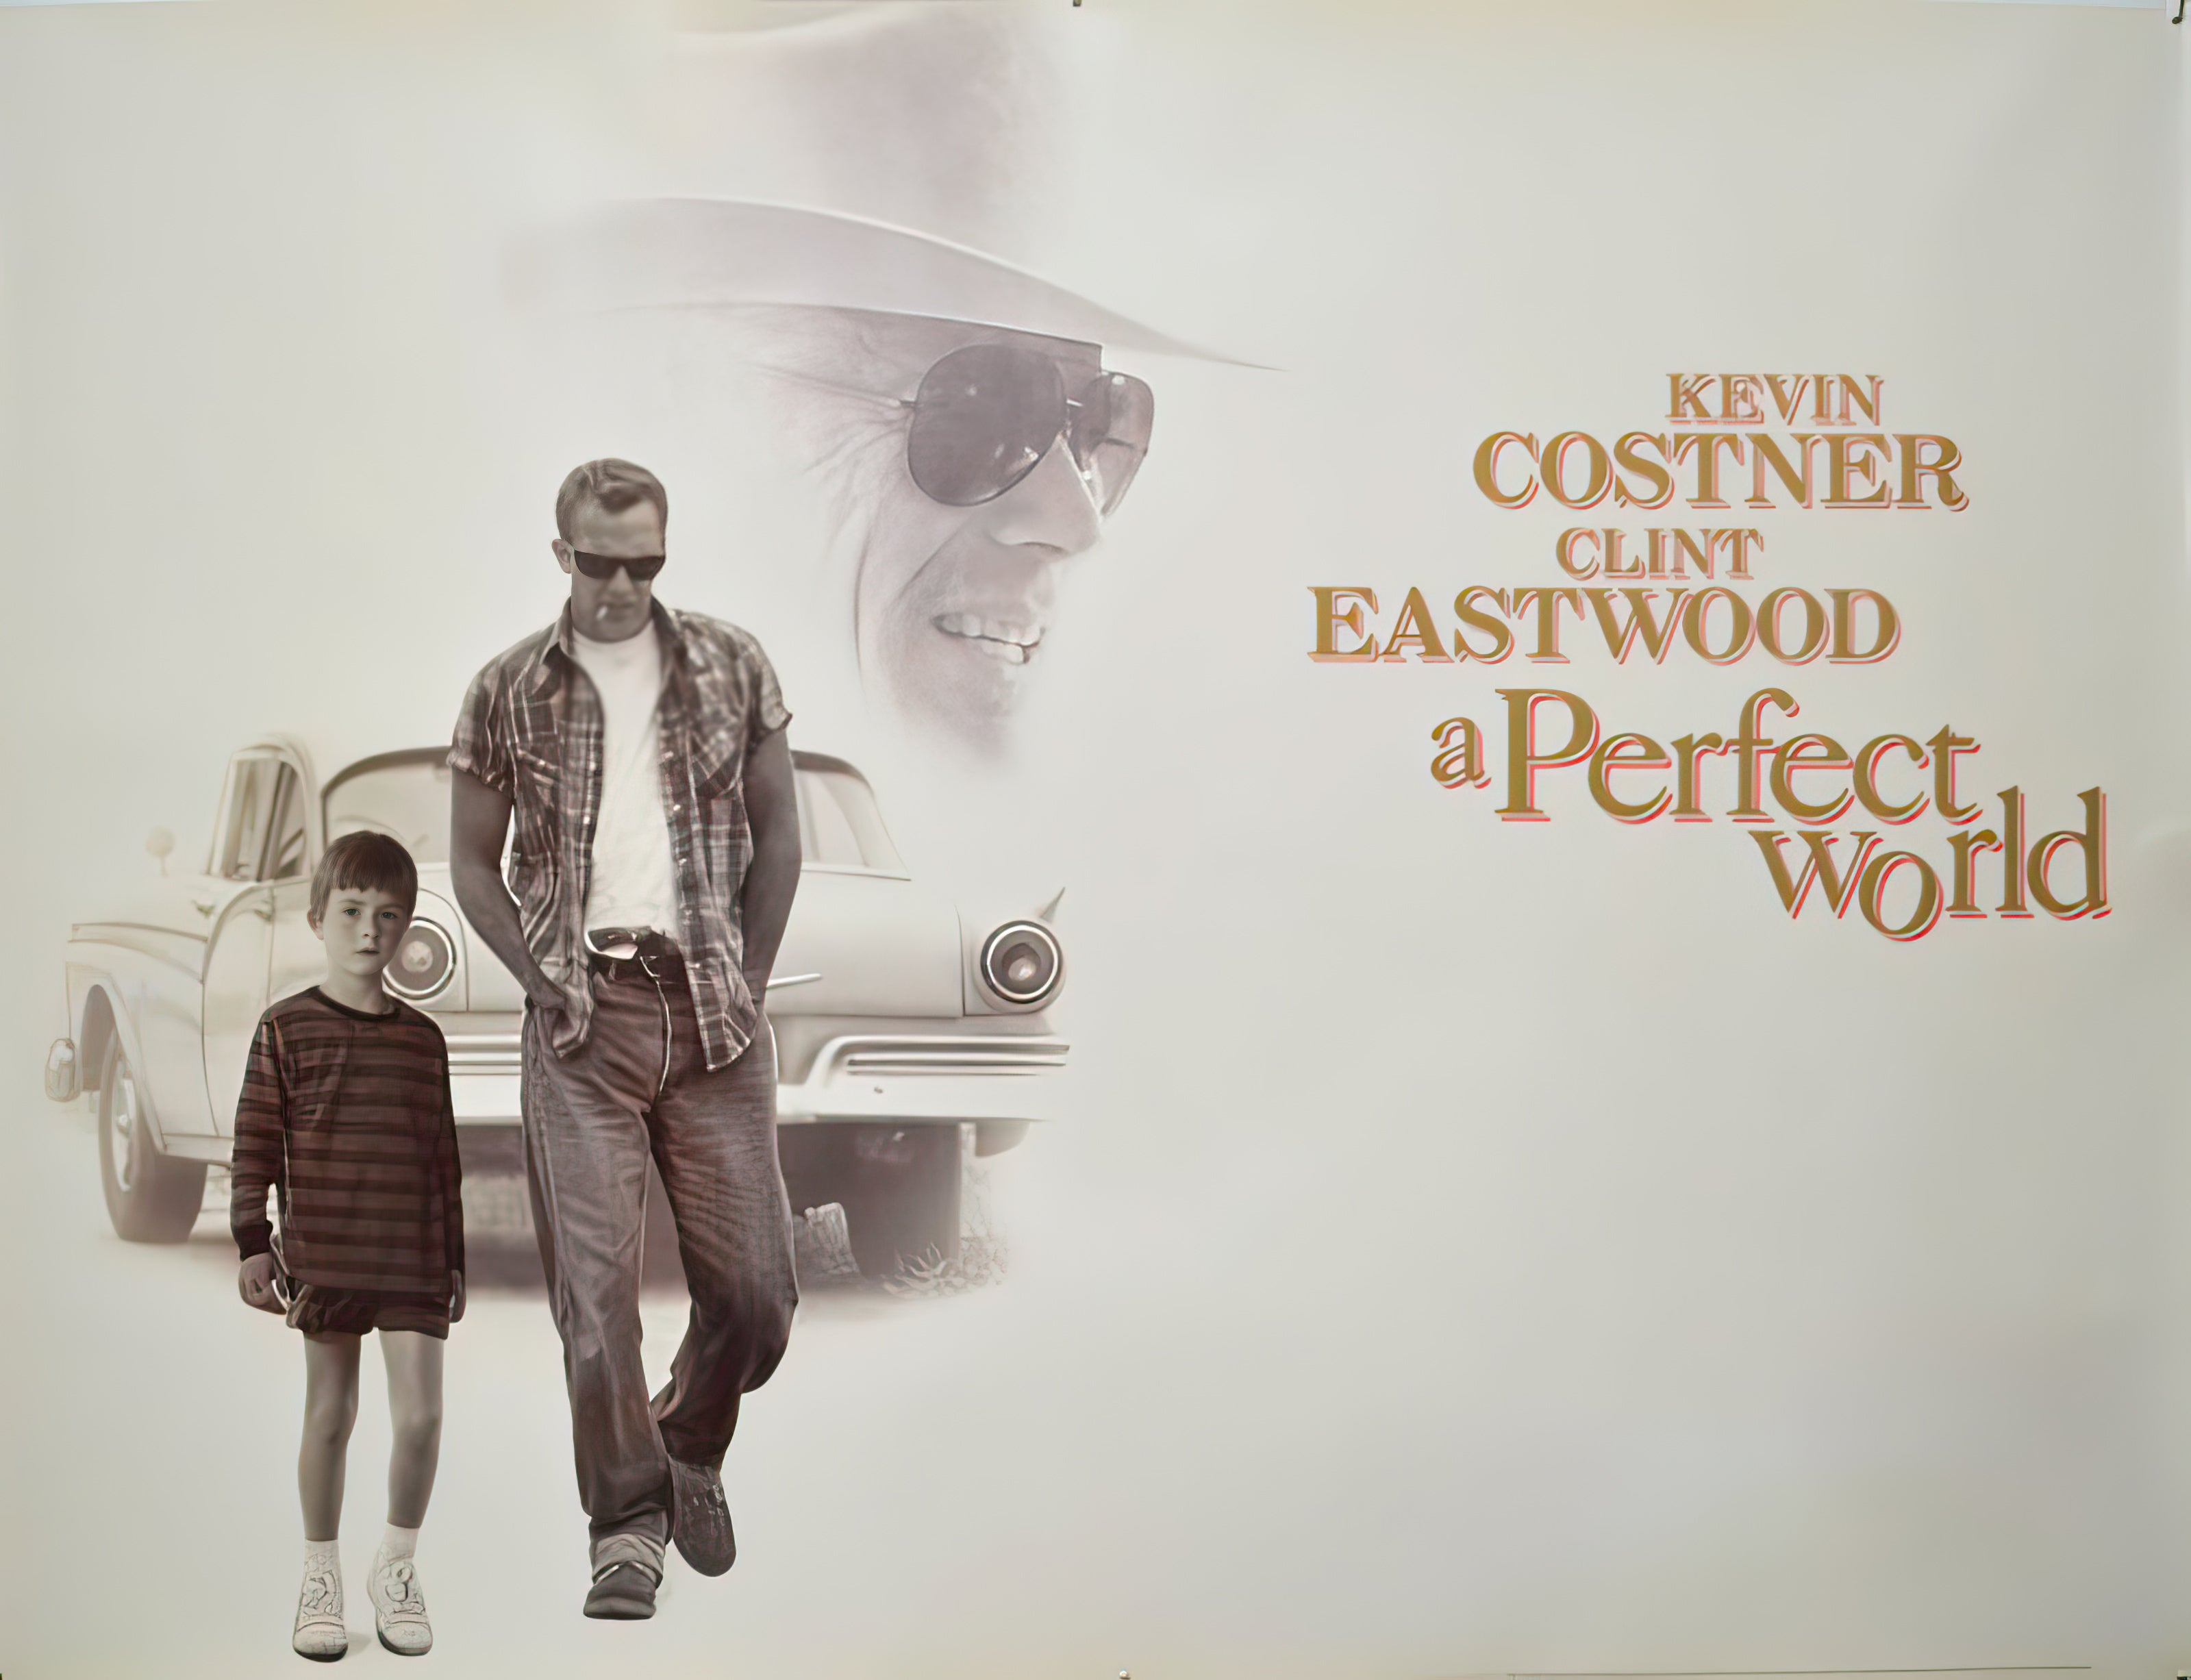 A Perfect World Script Screenplay - Image of Movie Poster